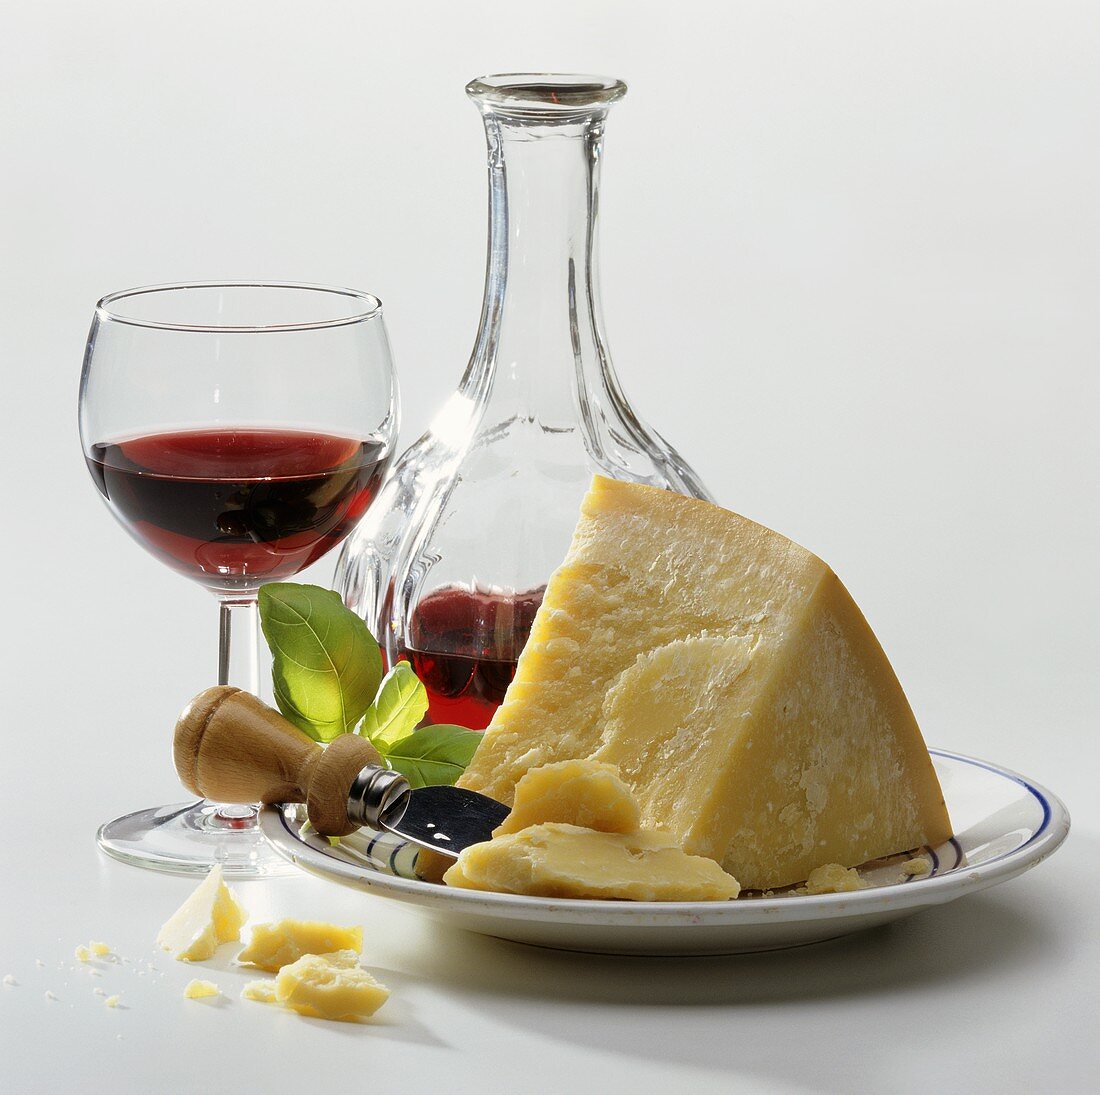 A piece of Parmesan on plate, décor: red wine glass & bottle